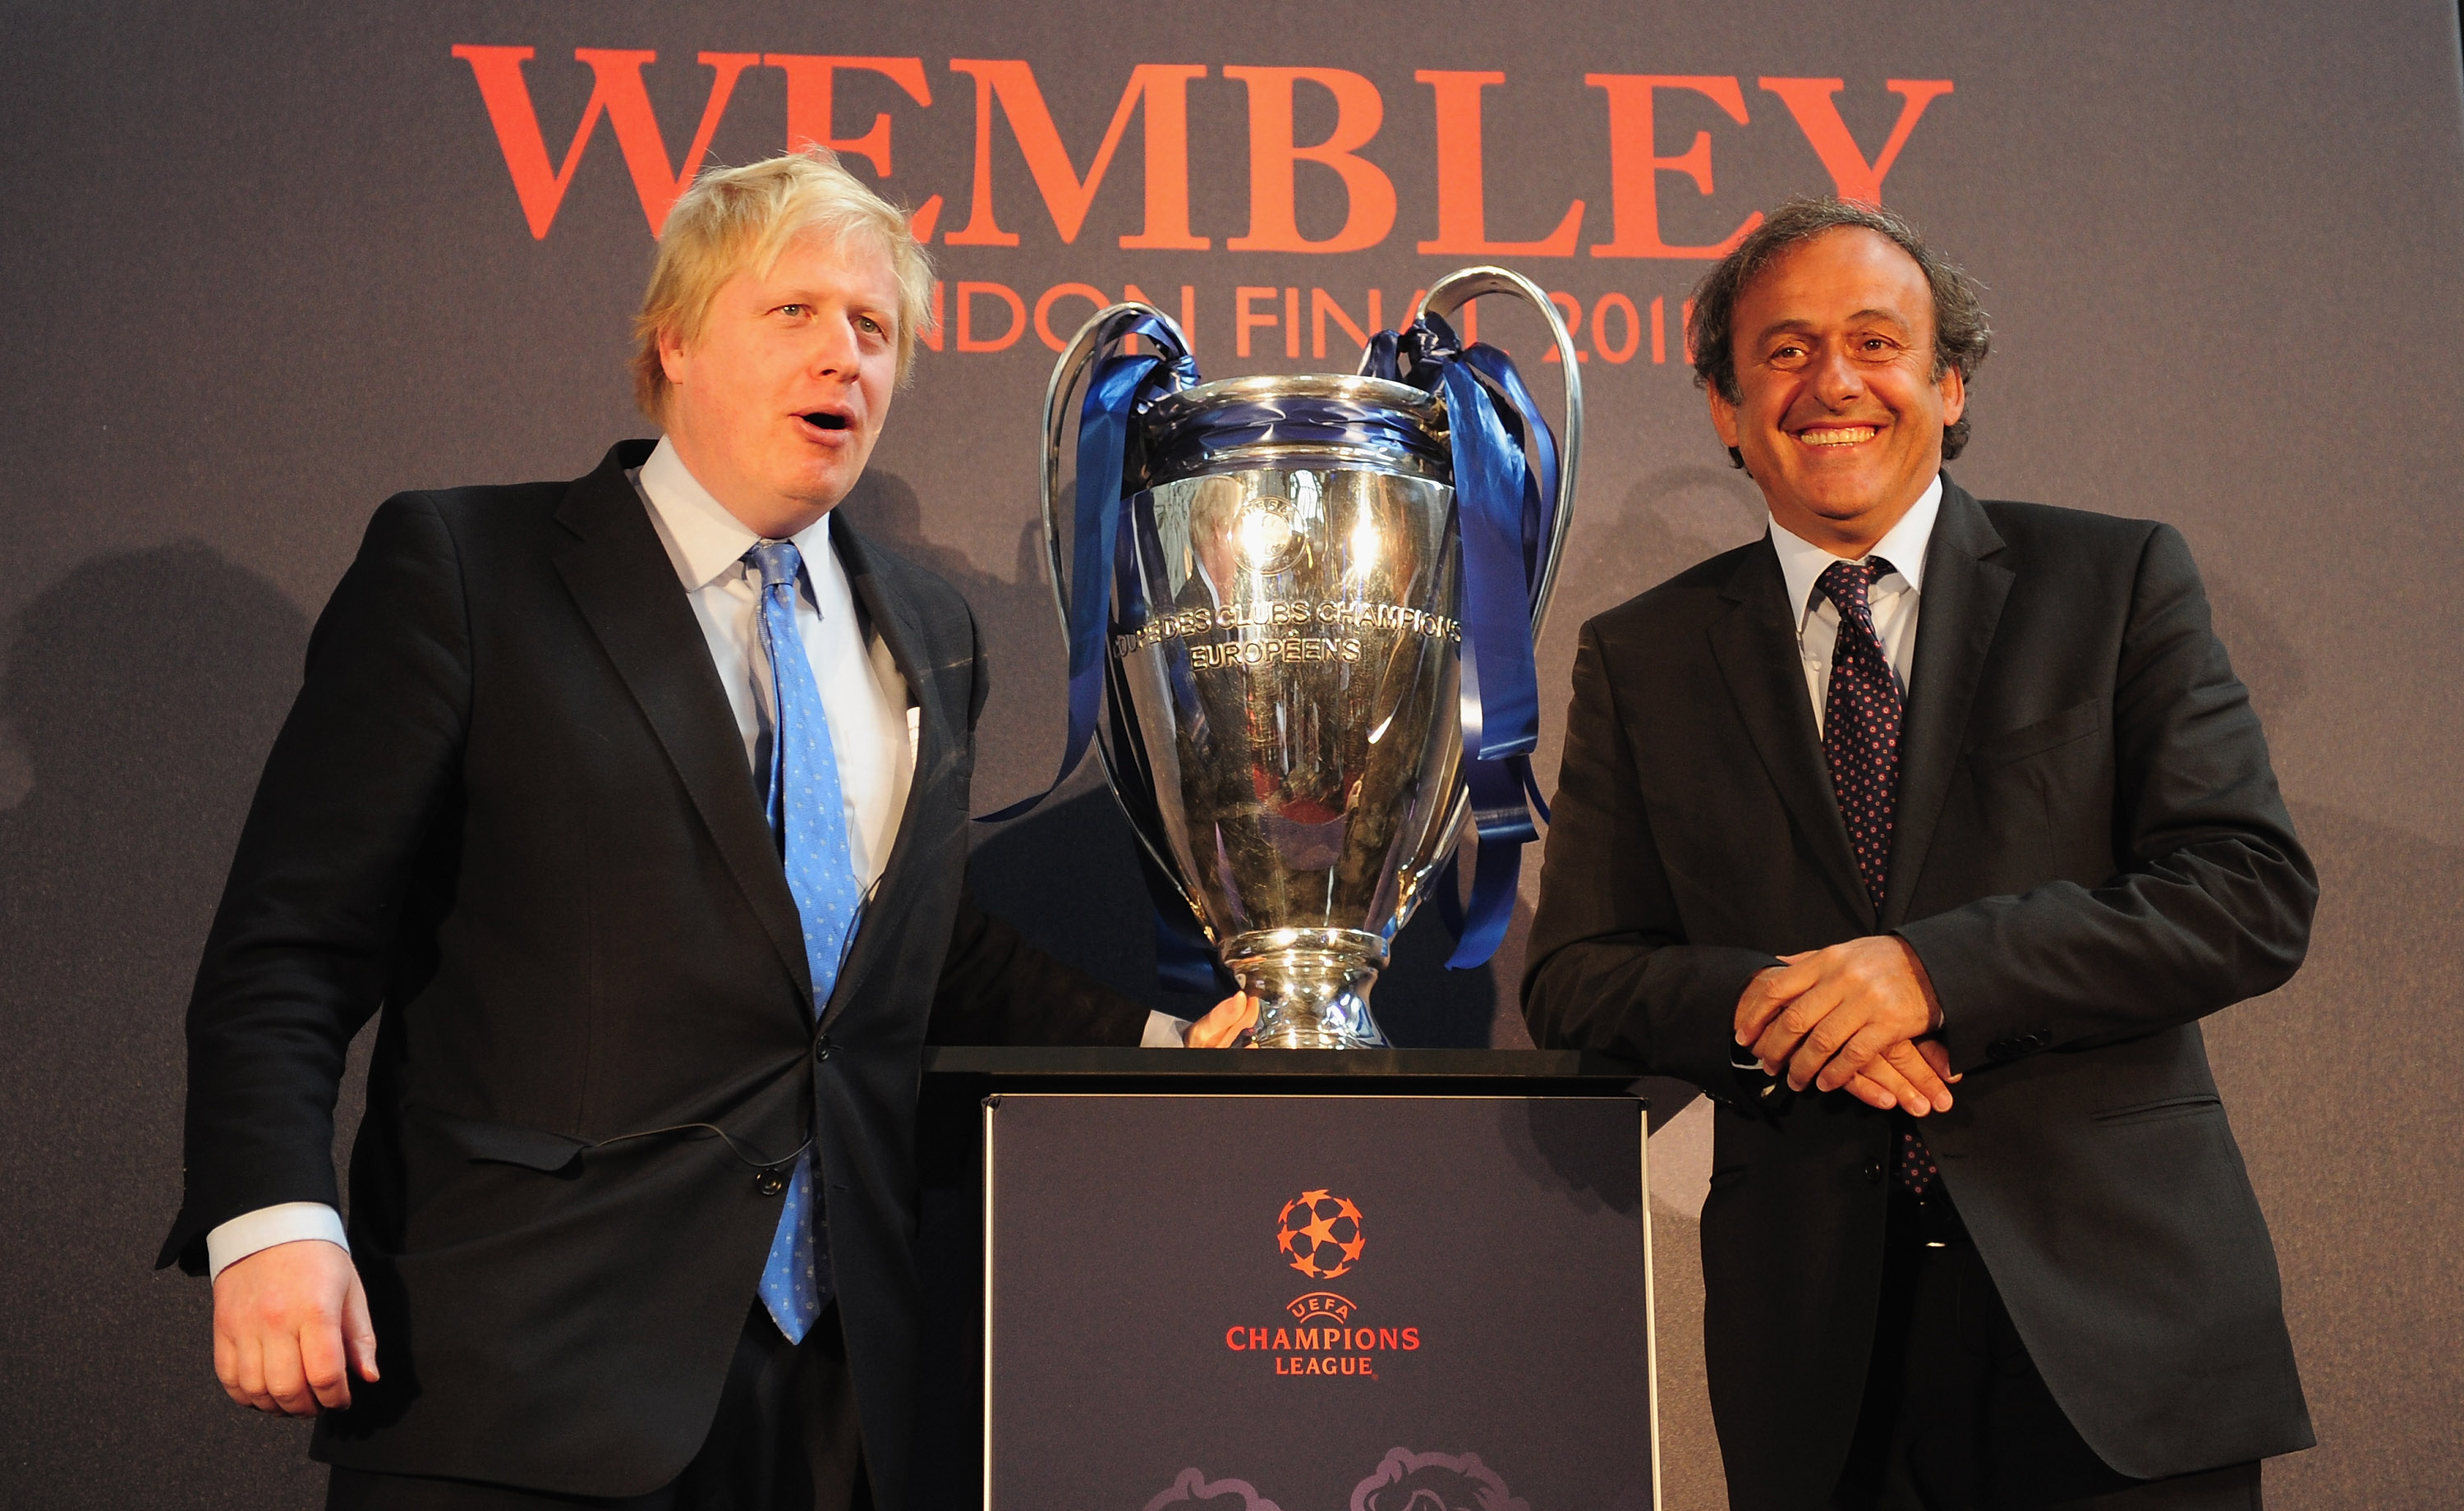 LONDON, ENGLAND - APRIL 20:  UEFA President Michel Platini hands over the UEFA Champions League Trophy to the Mayor of London Boris Johnson at the Guildhall on April 20, 2011 in London, England.  (Photo by Jamie McDonald/Getty Images)